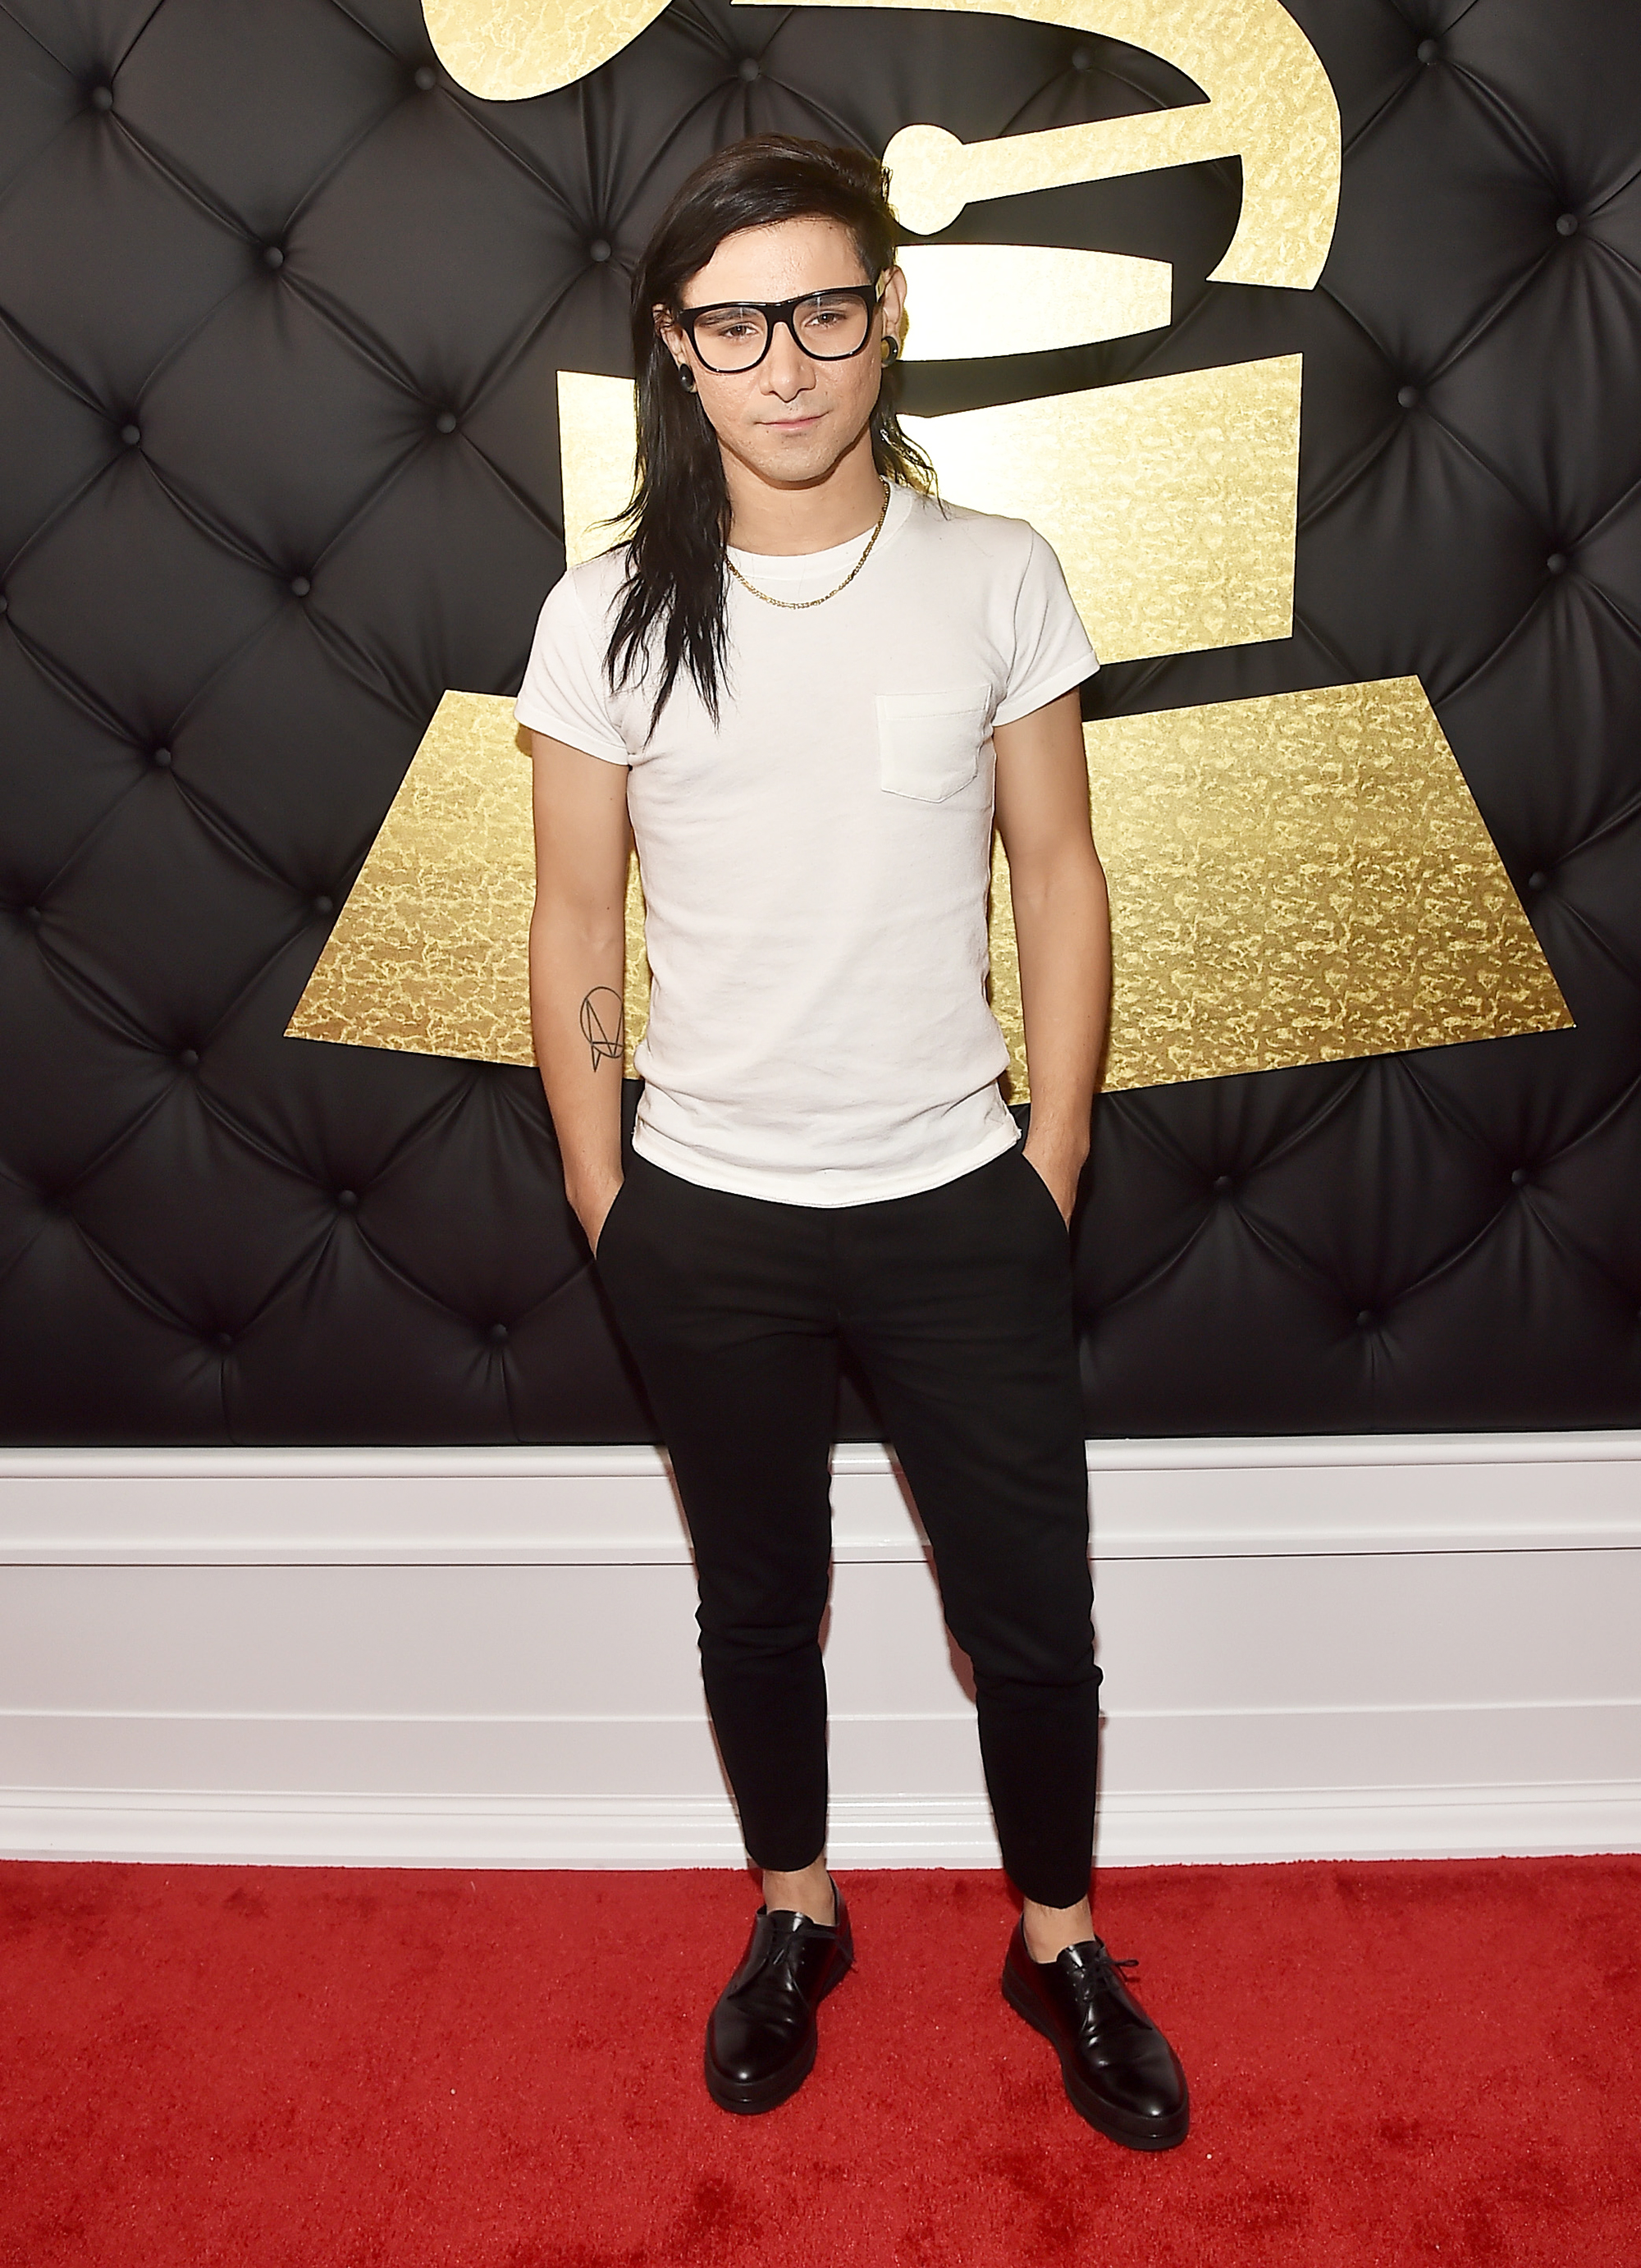 Skrillex attends The 59th GRAMMY Awards at STAPLES Center, on Feb. 12, 2017 in Los Angeles.